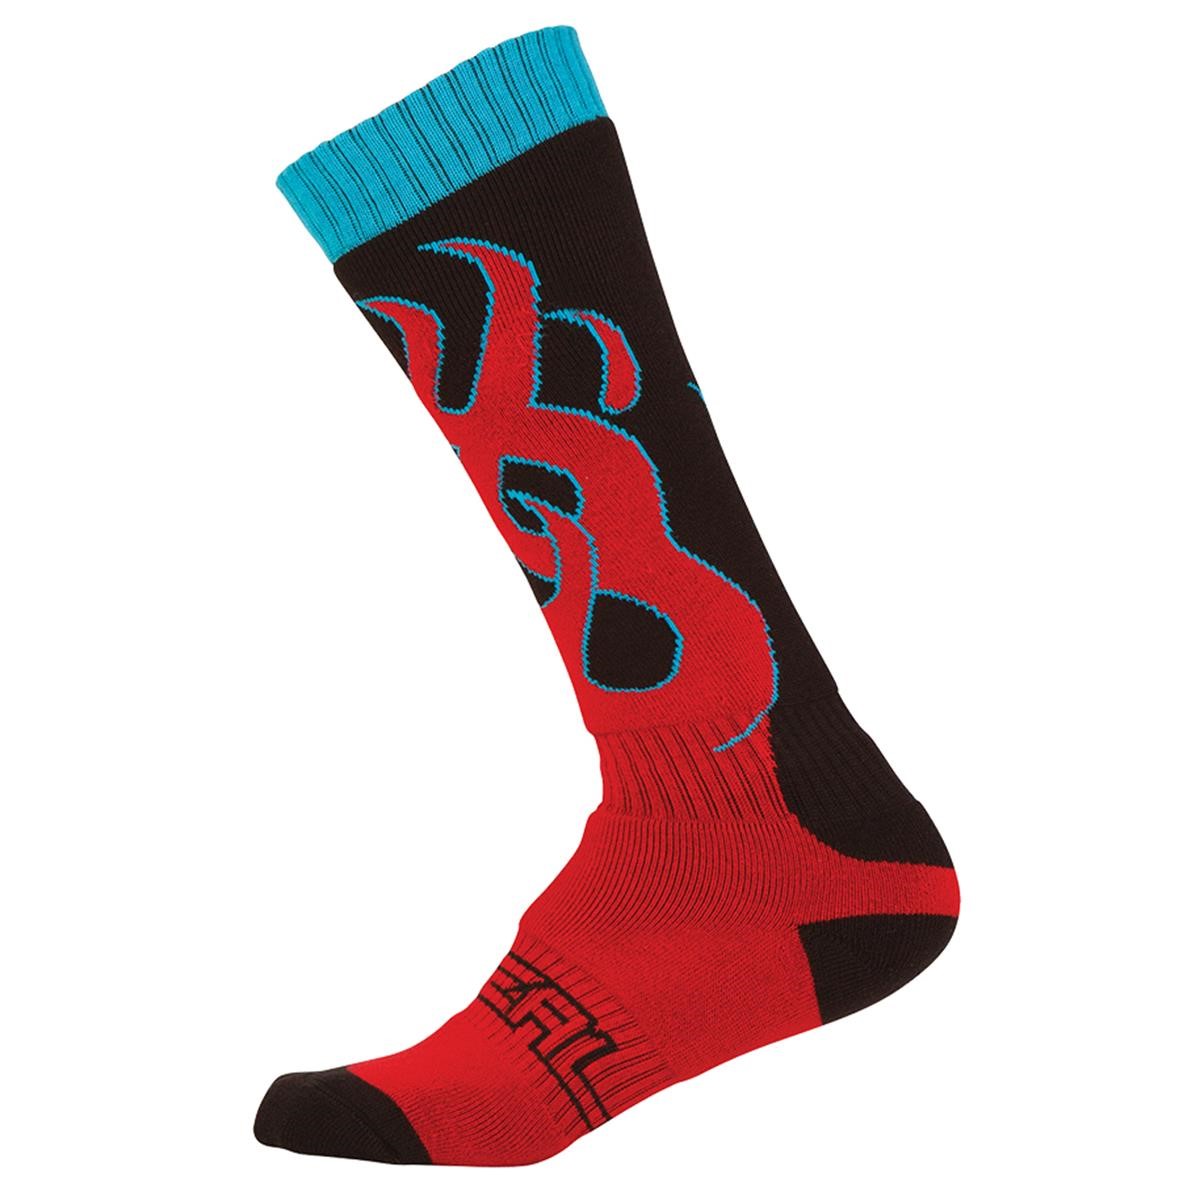 O'Neal Chaussettes Pro MX Torch - Black/Red